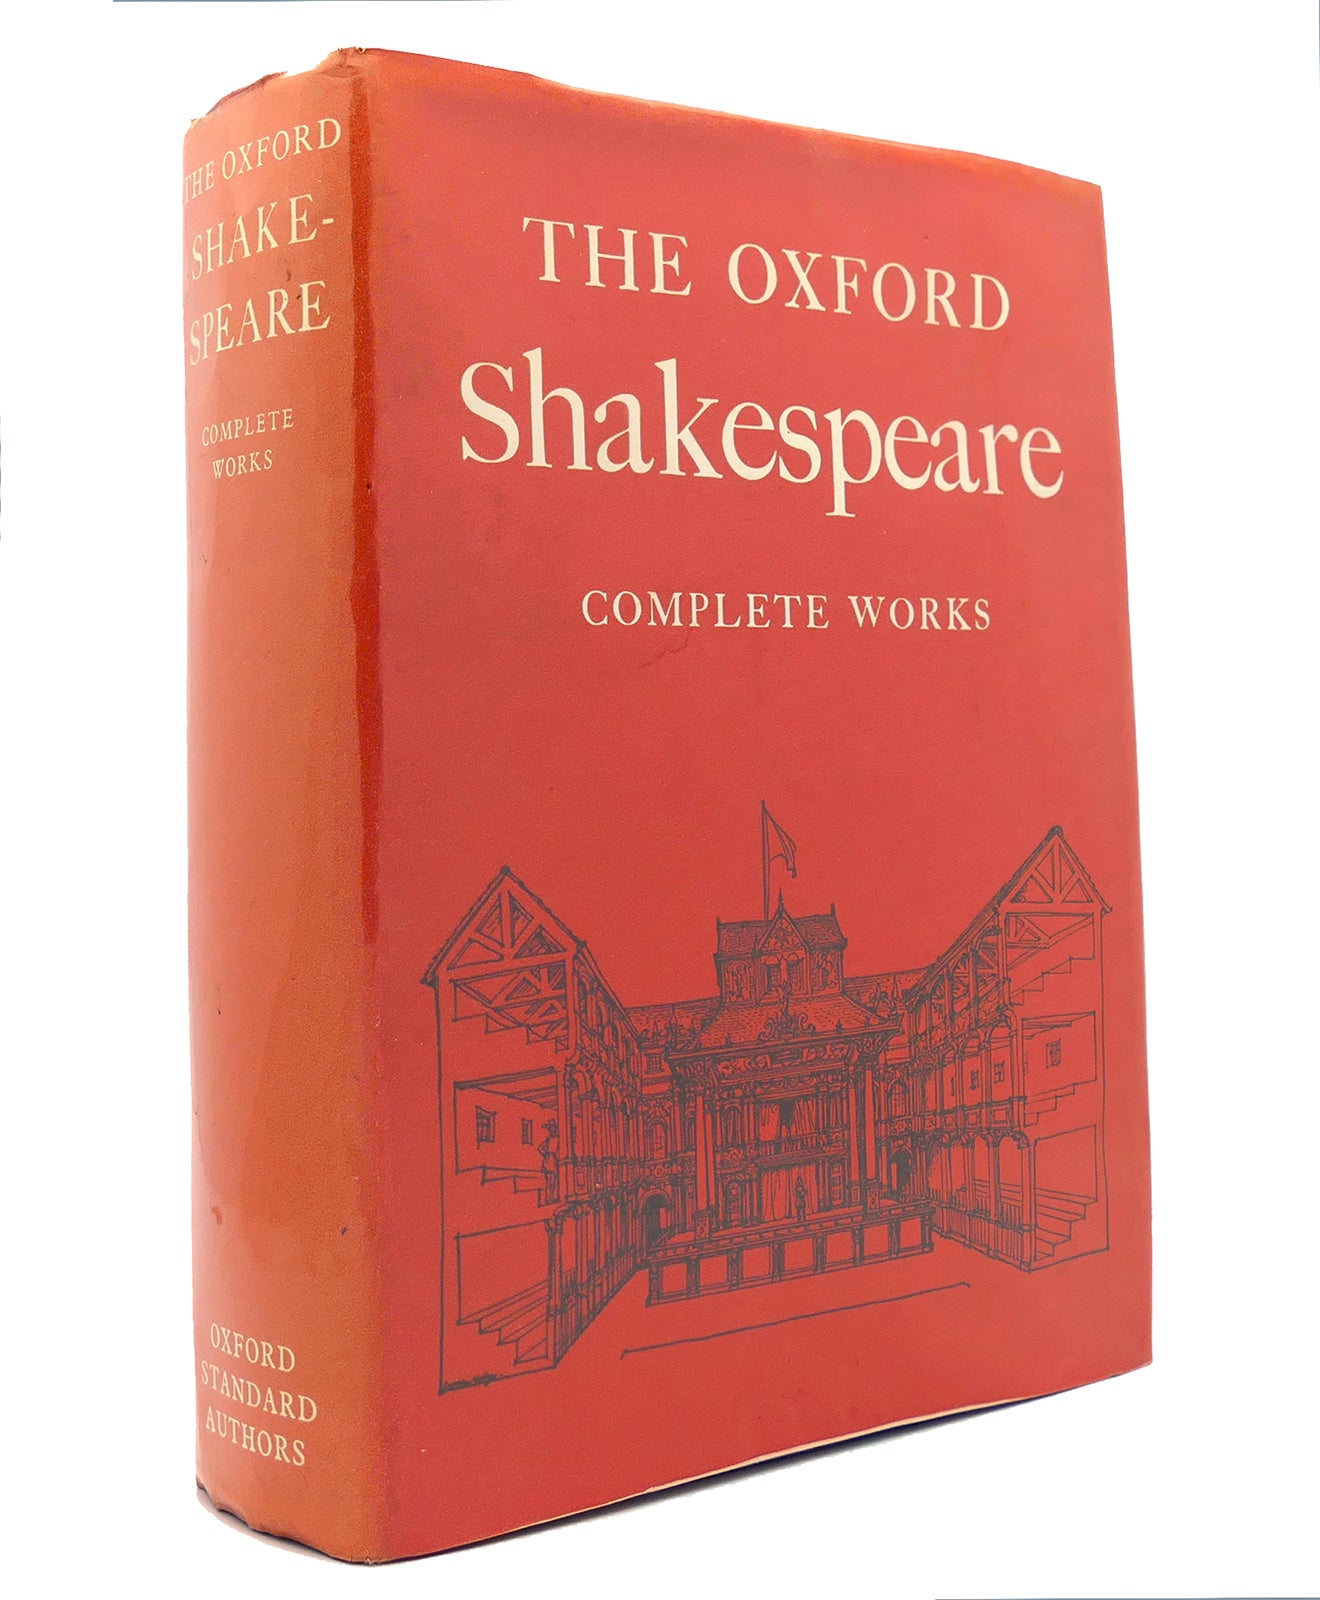 THE COMPLETE WORKS OF WILLIAM SHAKESPEARE by W. J. Craig on Rare Book Cellar